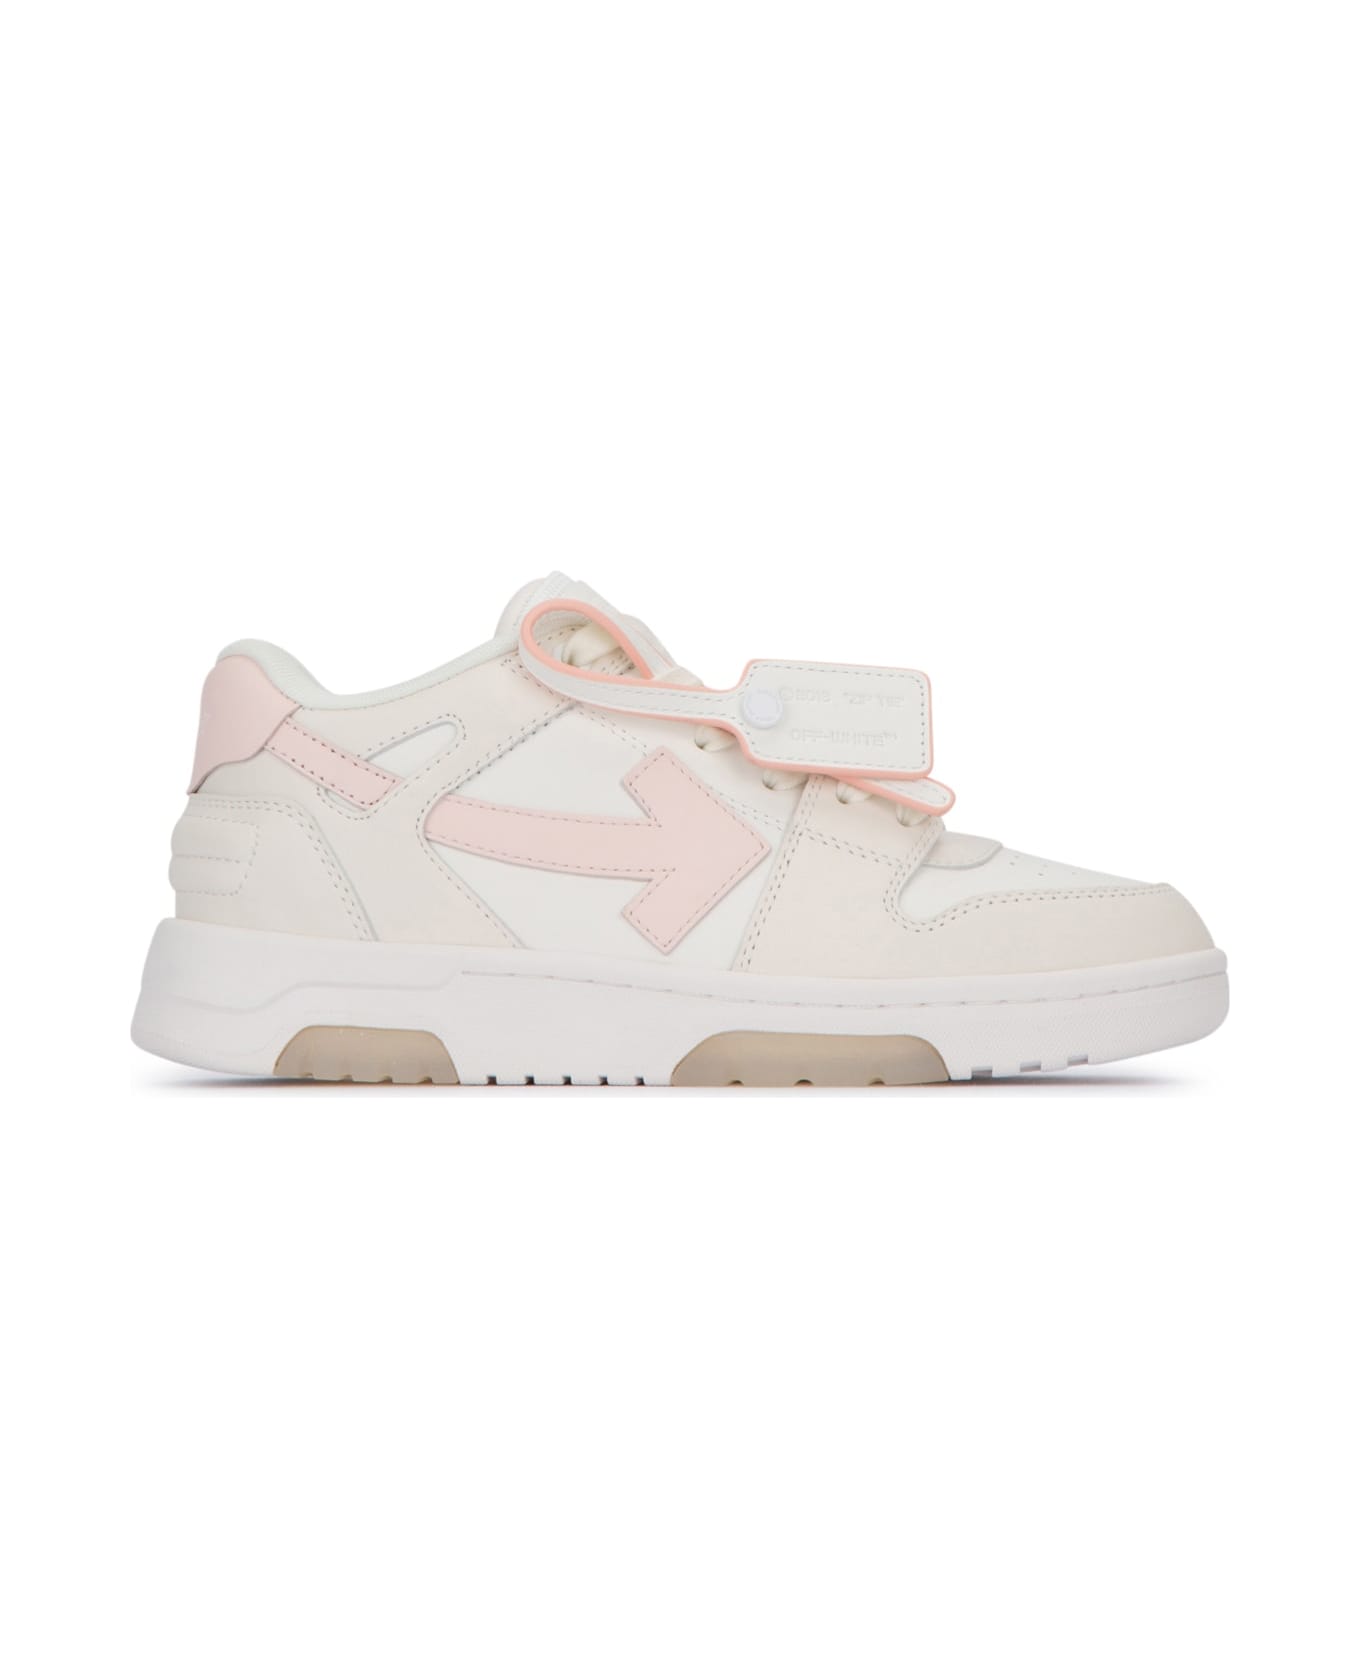 Off-White Sneakers - WHITEPINK